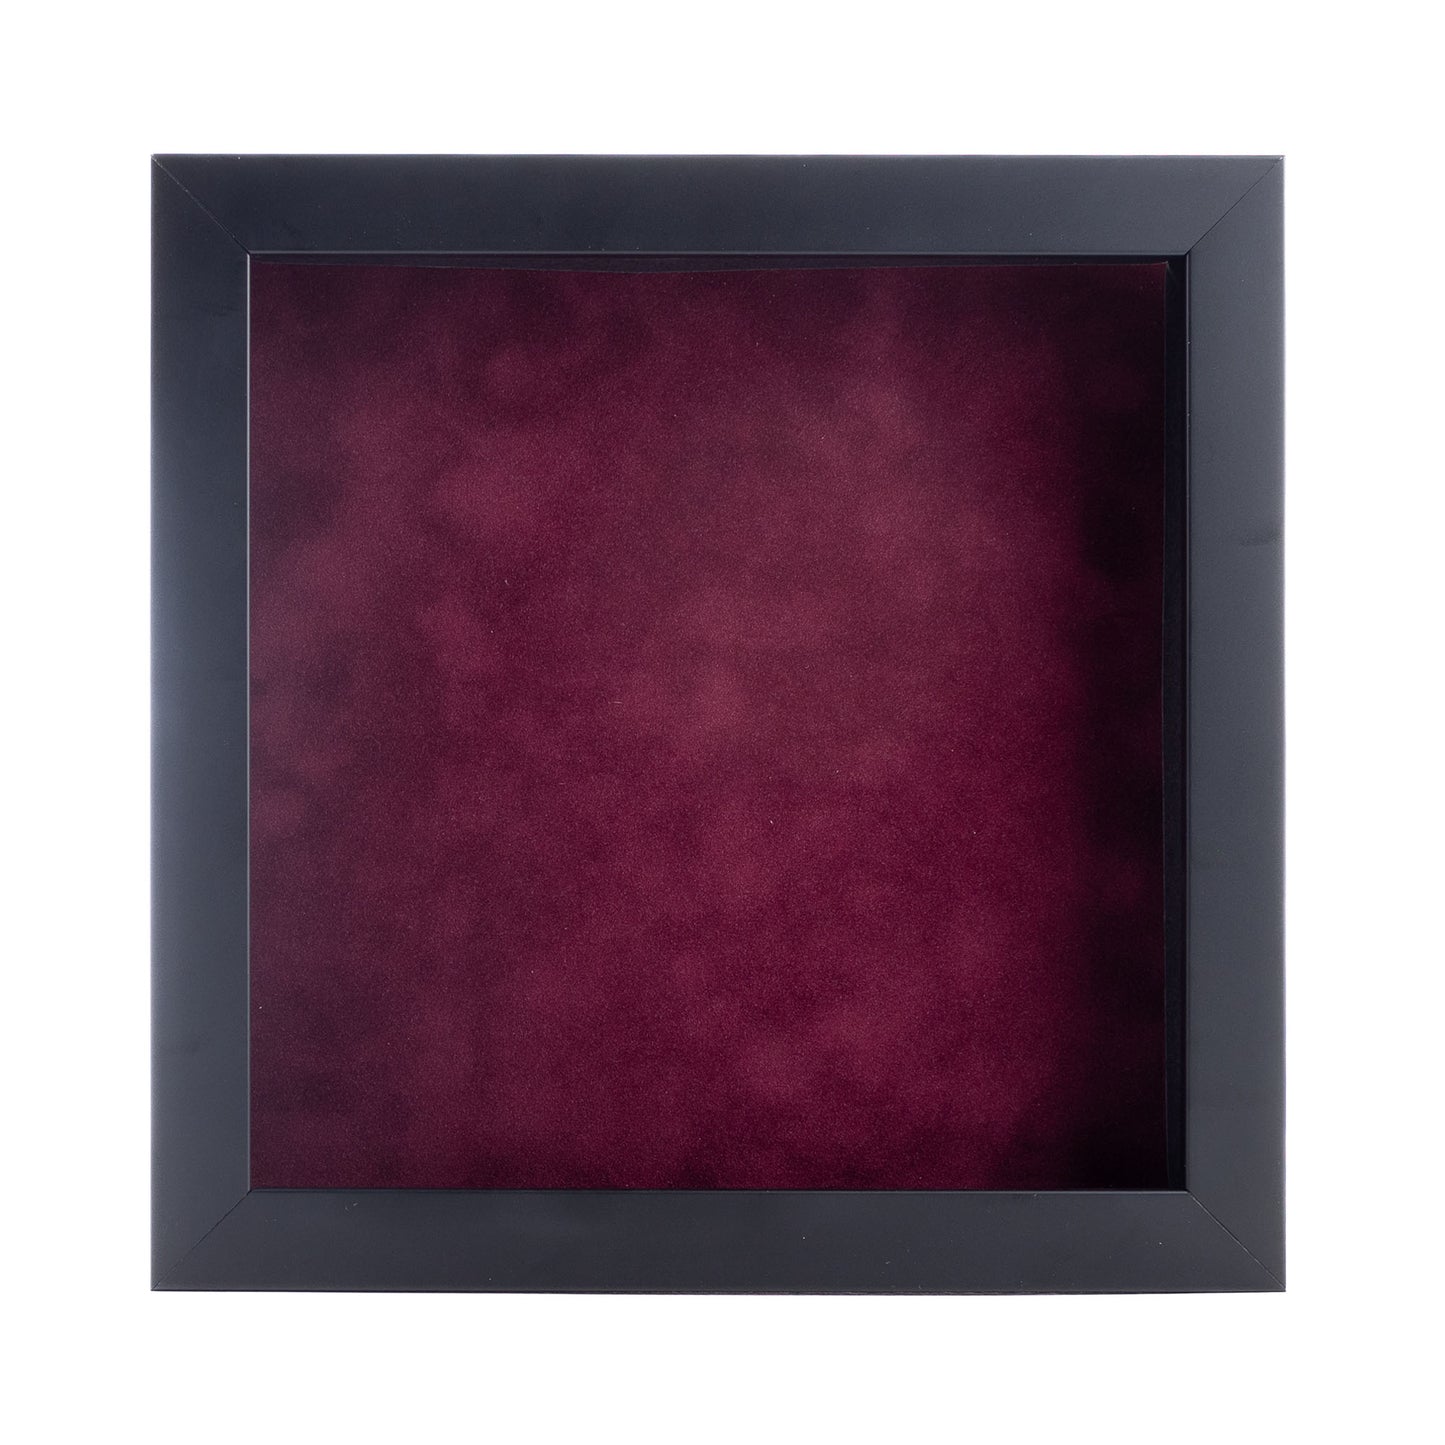 Black Shadow Box Frame With Dark Berry Acid-Free Suede Backing